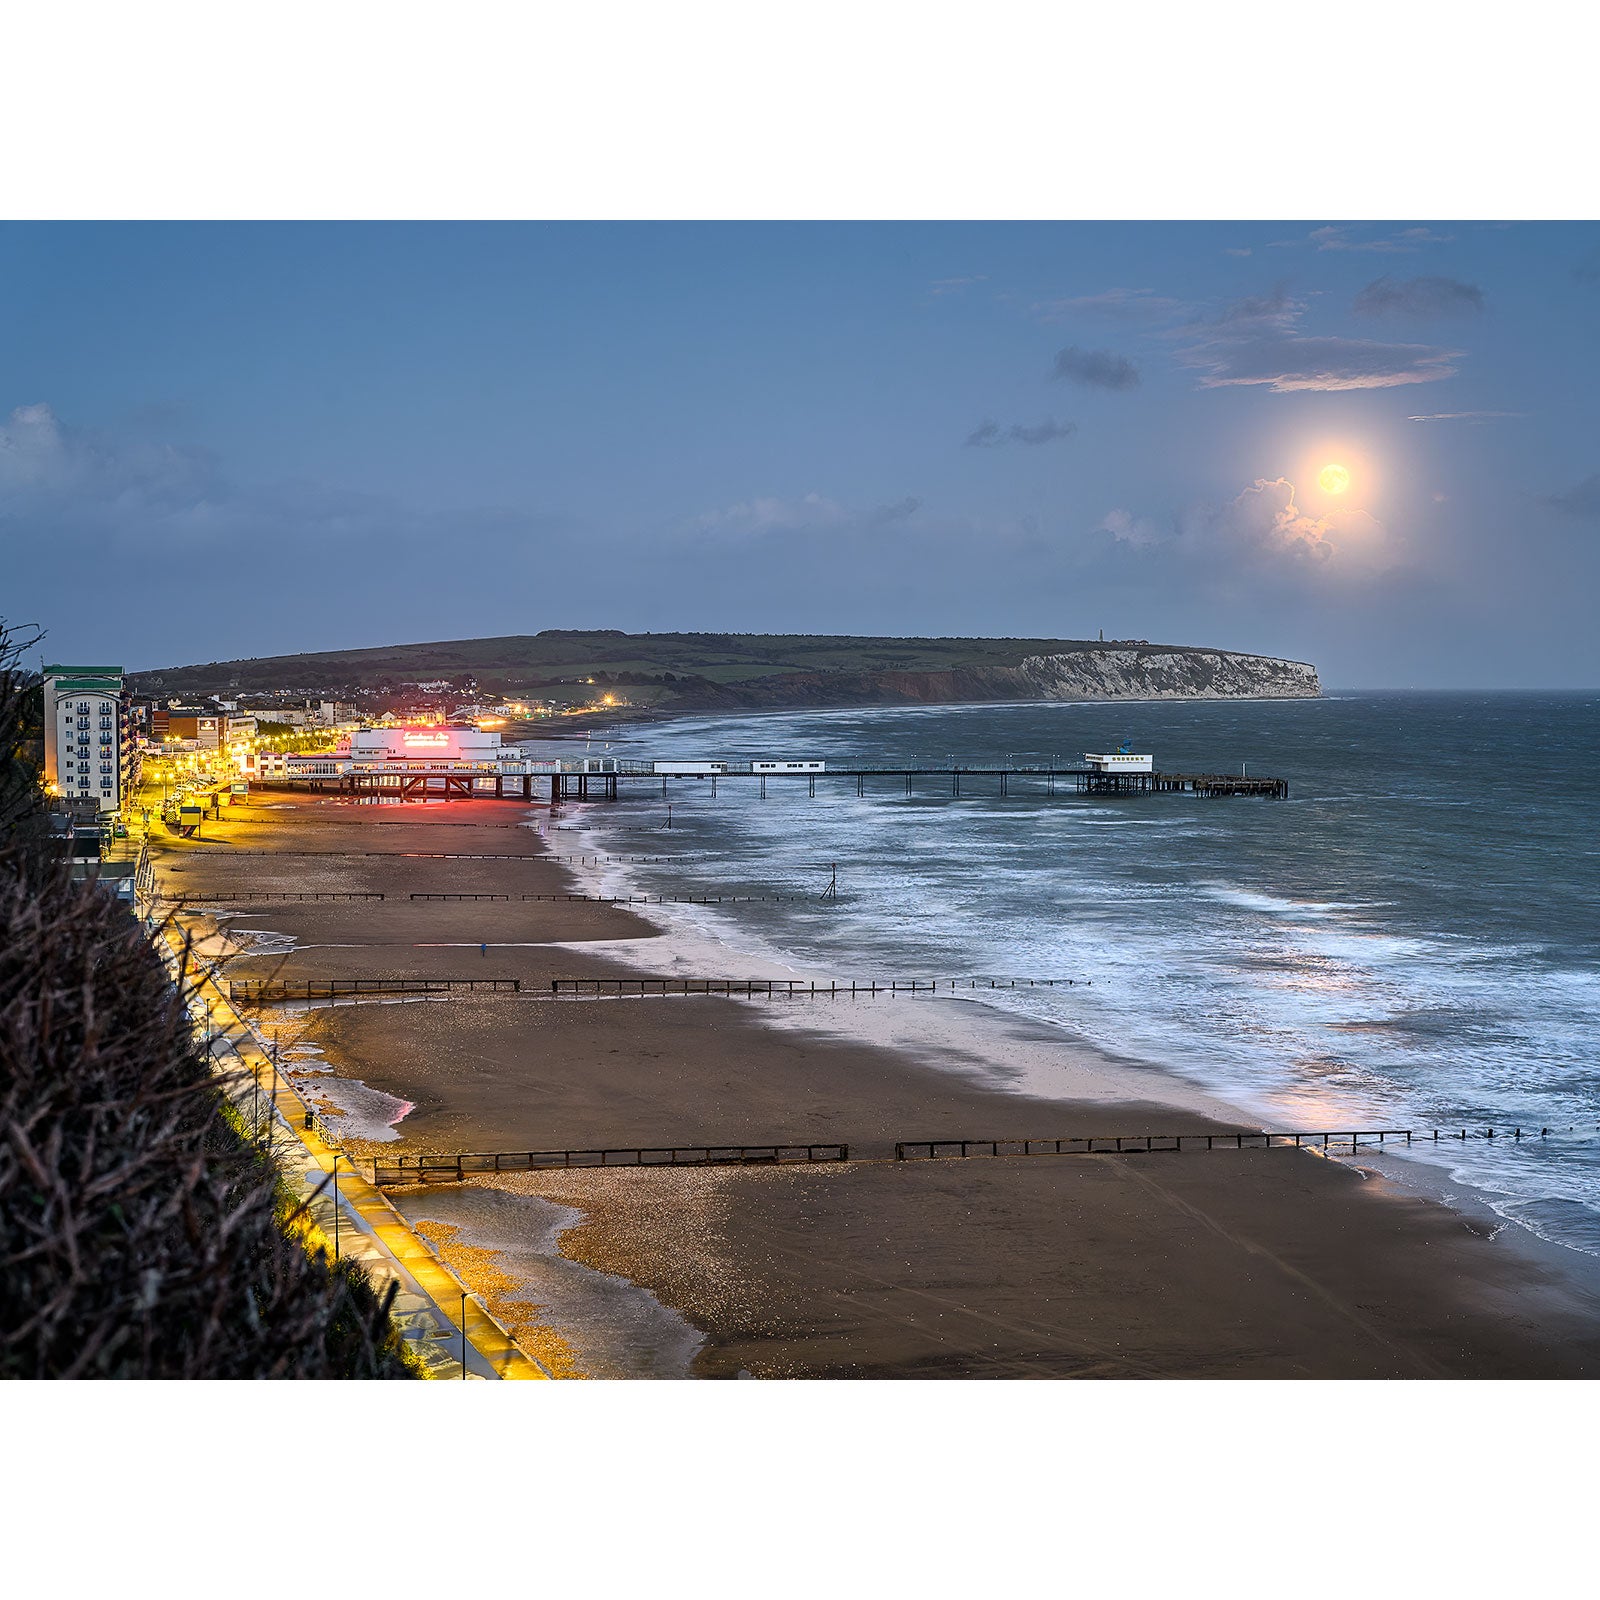 Moonrise over Sandown coastal town with illuminated Gascoigne pier and beach at twilight by Available Light Photography.